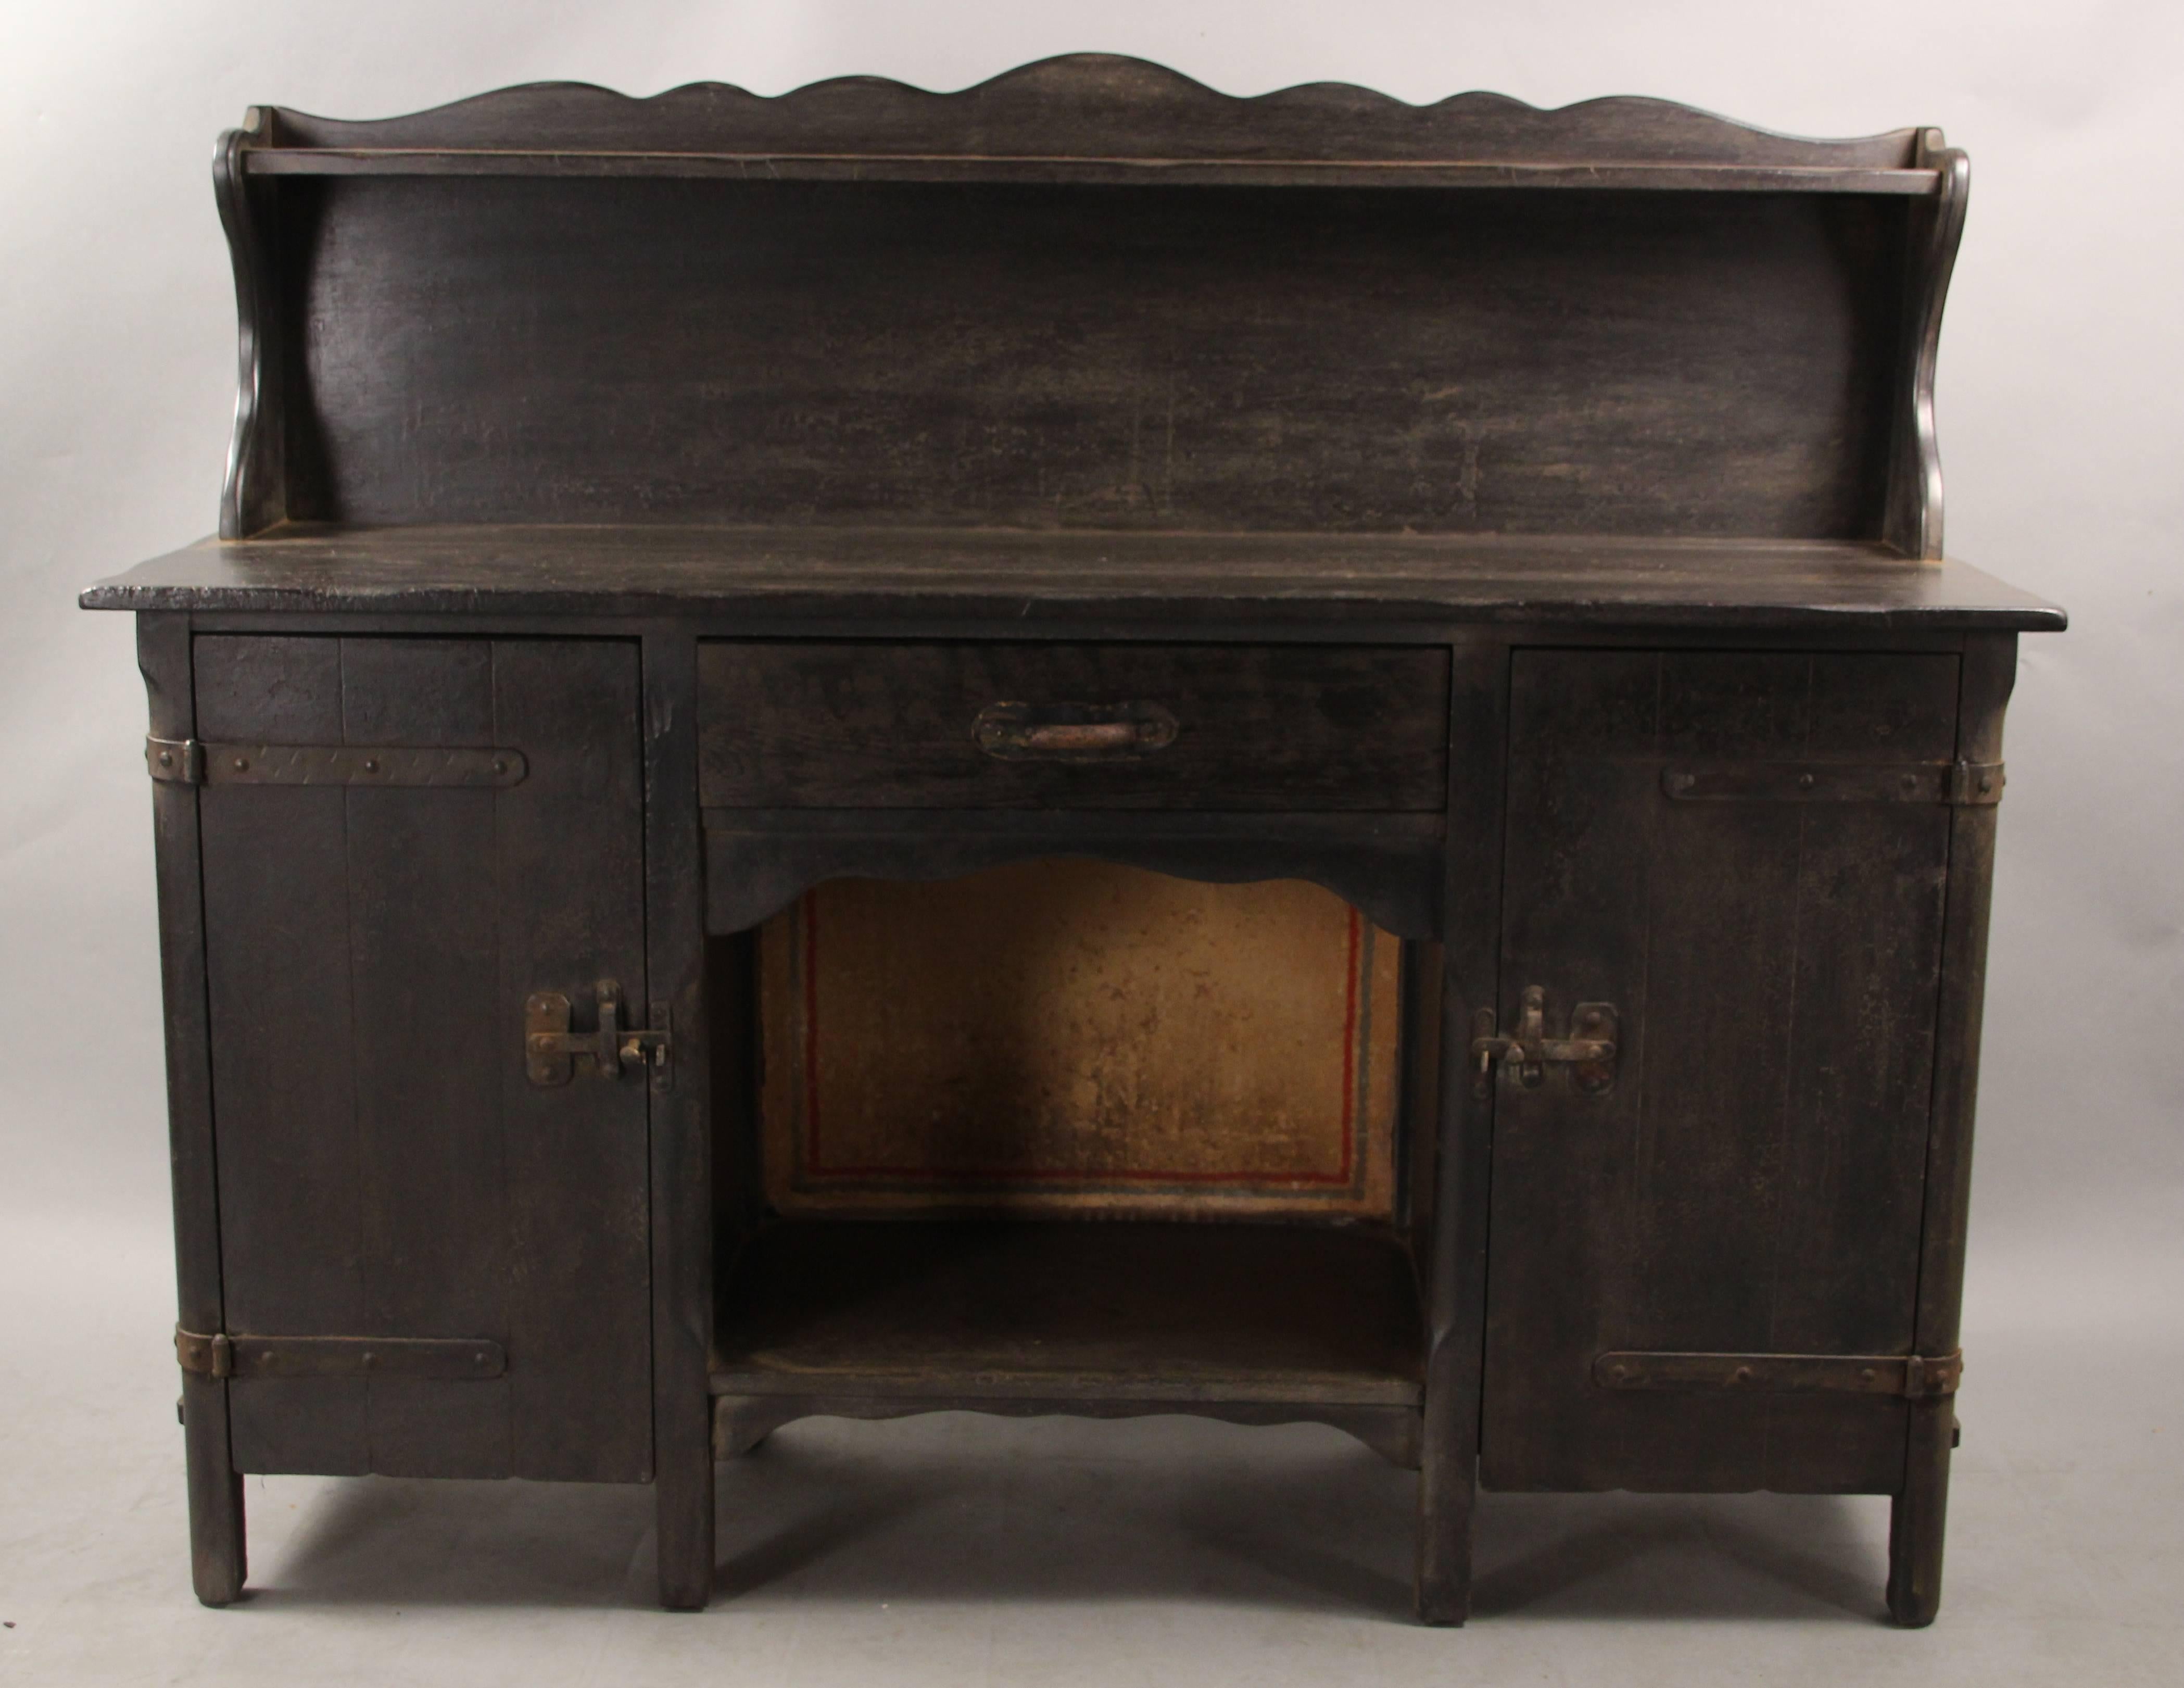 Monterey sideboard with old wood finish. Wonderful iron hardware. It offers a lot of storage area: drawers, cabinet and shelf areas.